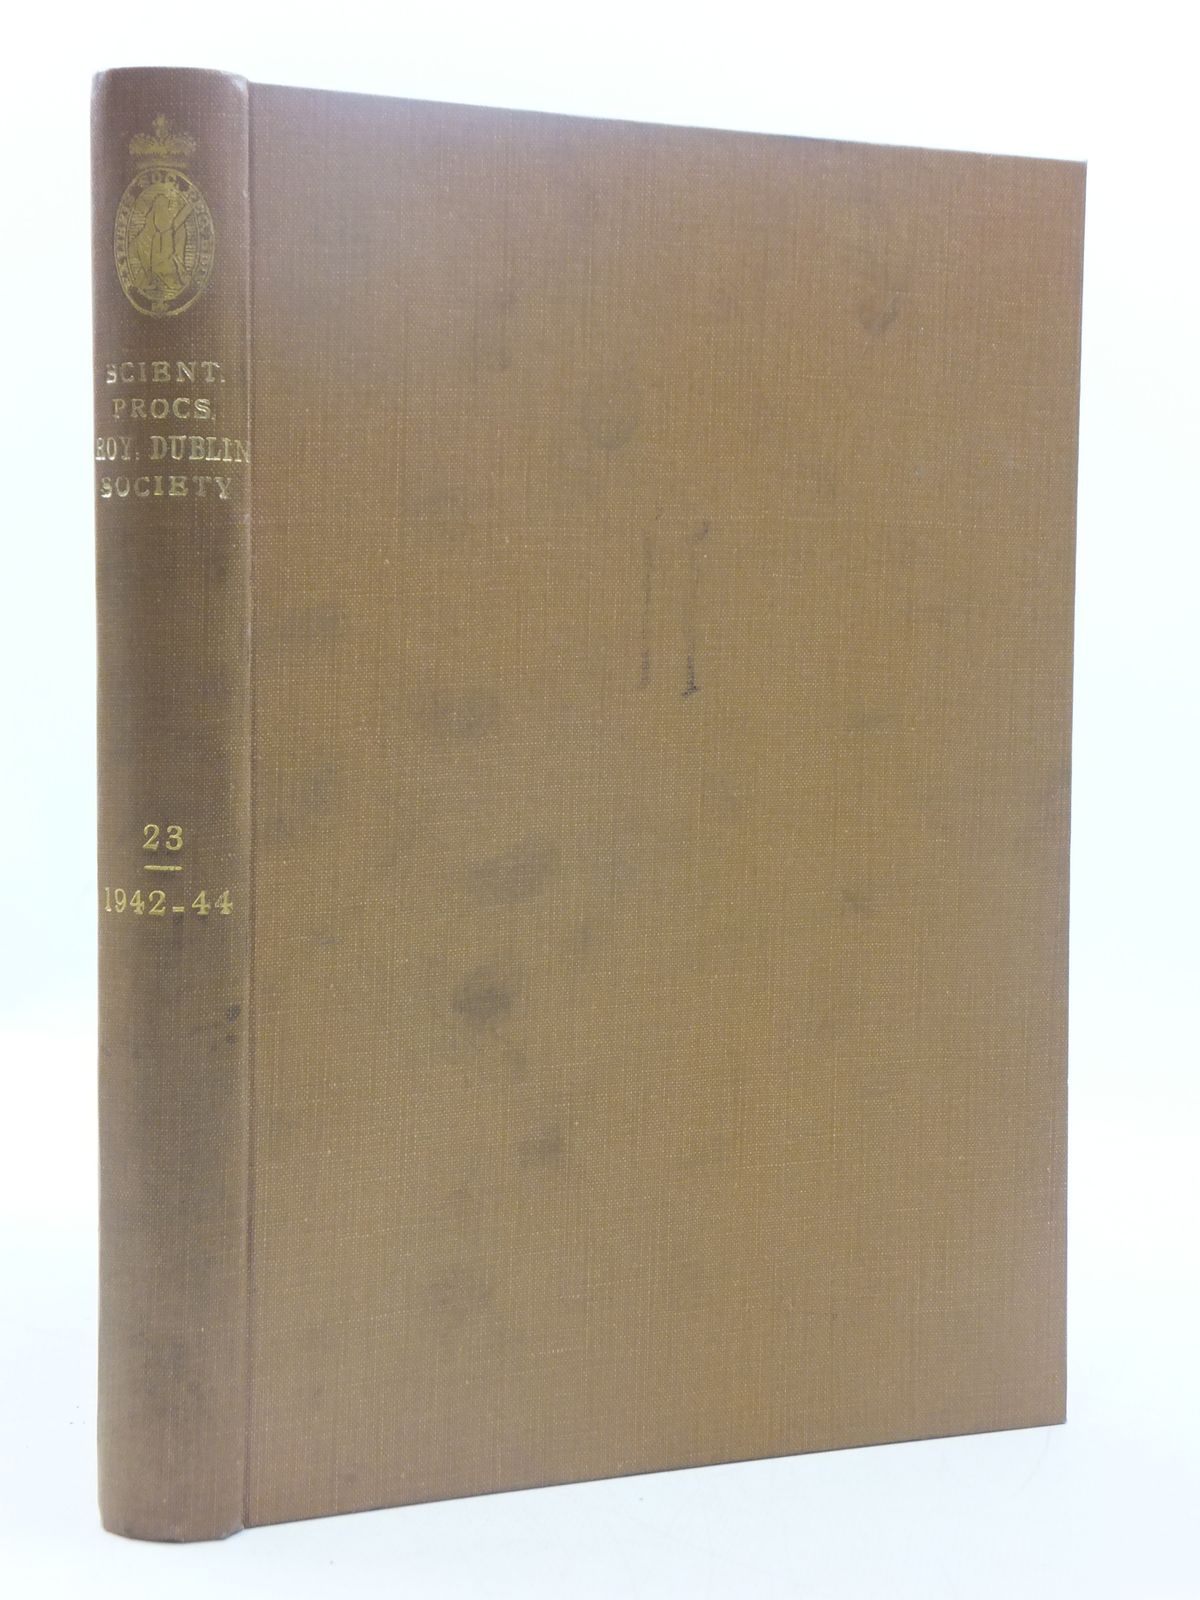 Photo of THE SCIENTIFIC PROCEEDINGS OF THE ROYAL DUBLIN SOCIETY VOLUME 23 (1942-44)- Stock Number: 1605205